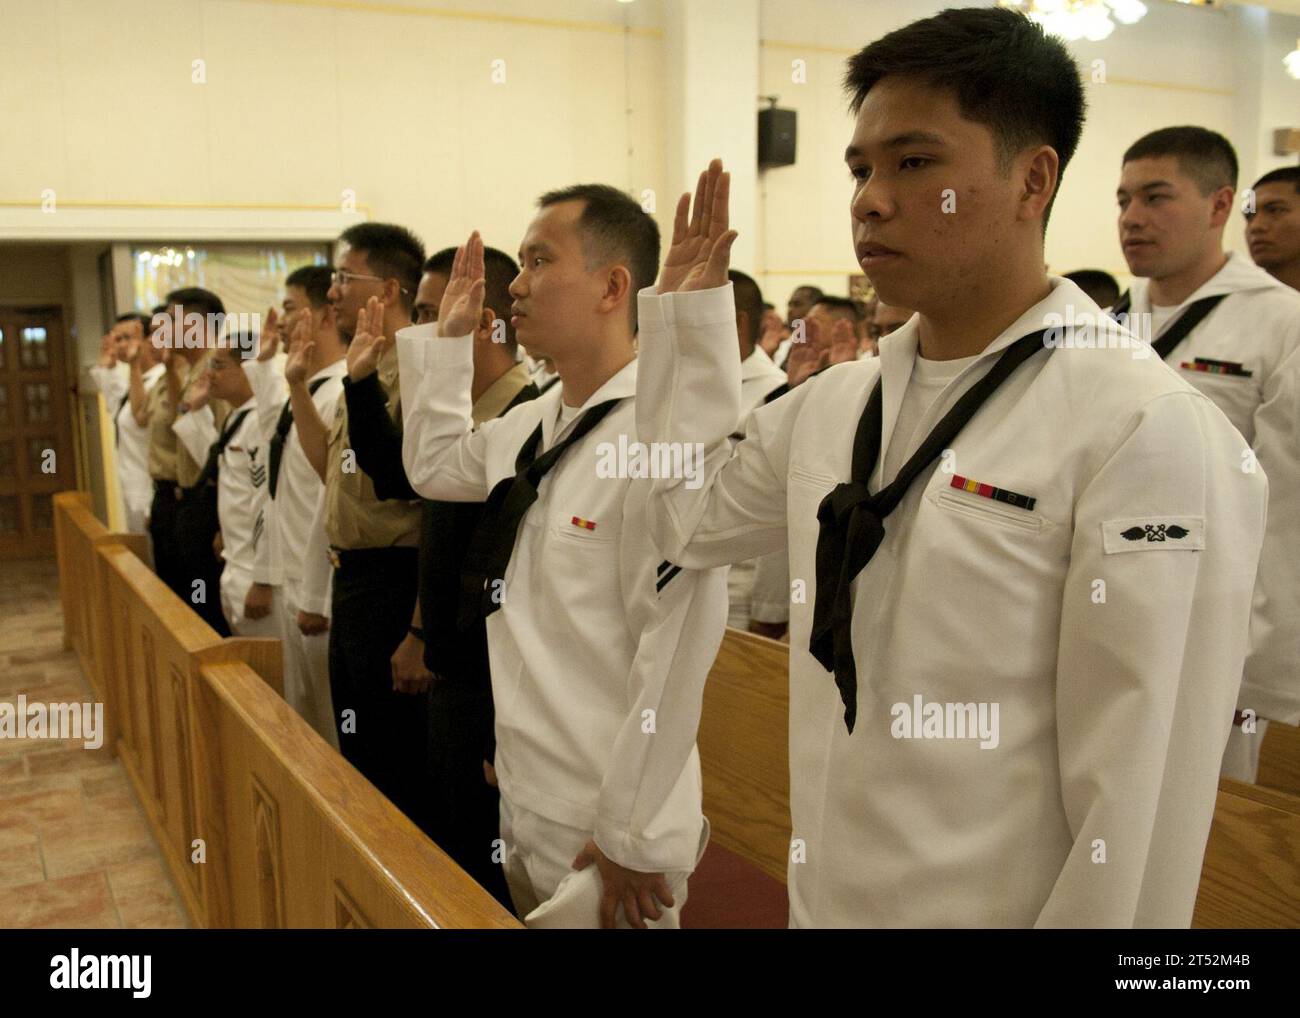 110527EA192-061 YOKOSUKA, Japan (May 27, 2011) Sailors recite the oath of allegiance during a naturalization ceremony at Commander, Fleet Activities Yokosuka. During the ceremony, 79 service members from 19 countries became the newest citizens of the United States. Navy Stock Photo